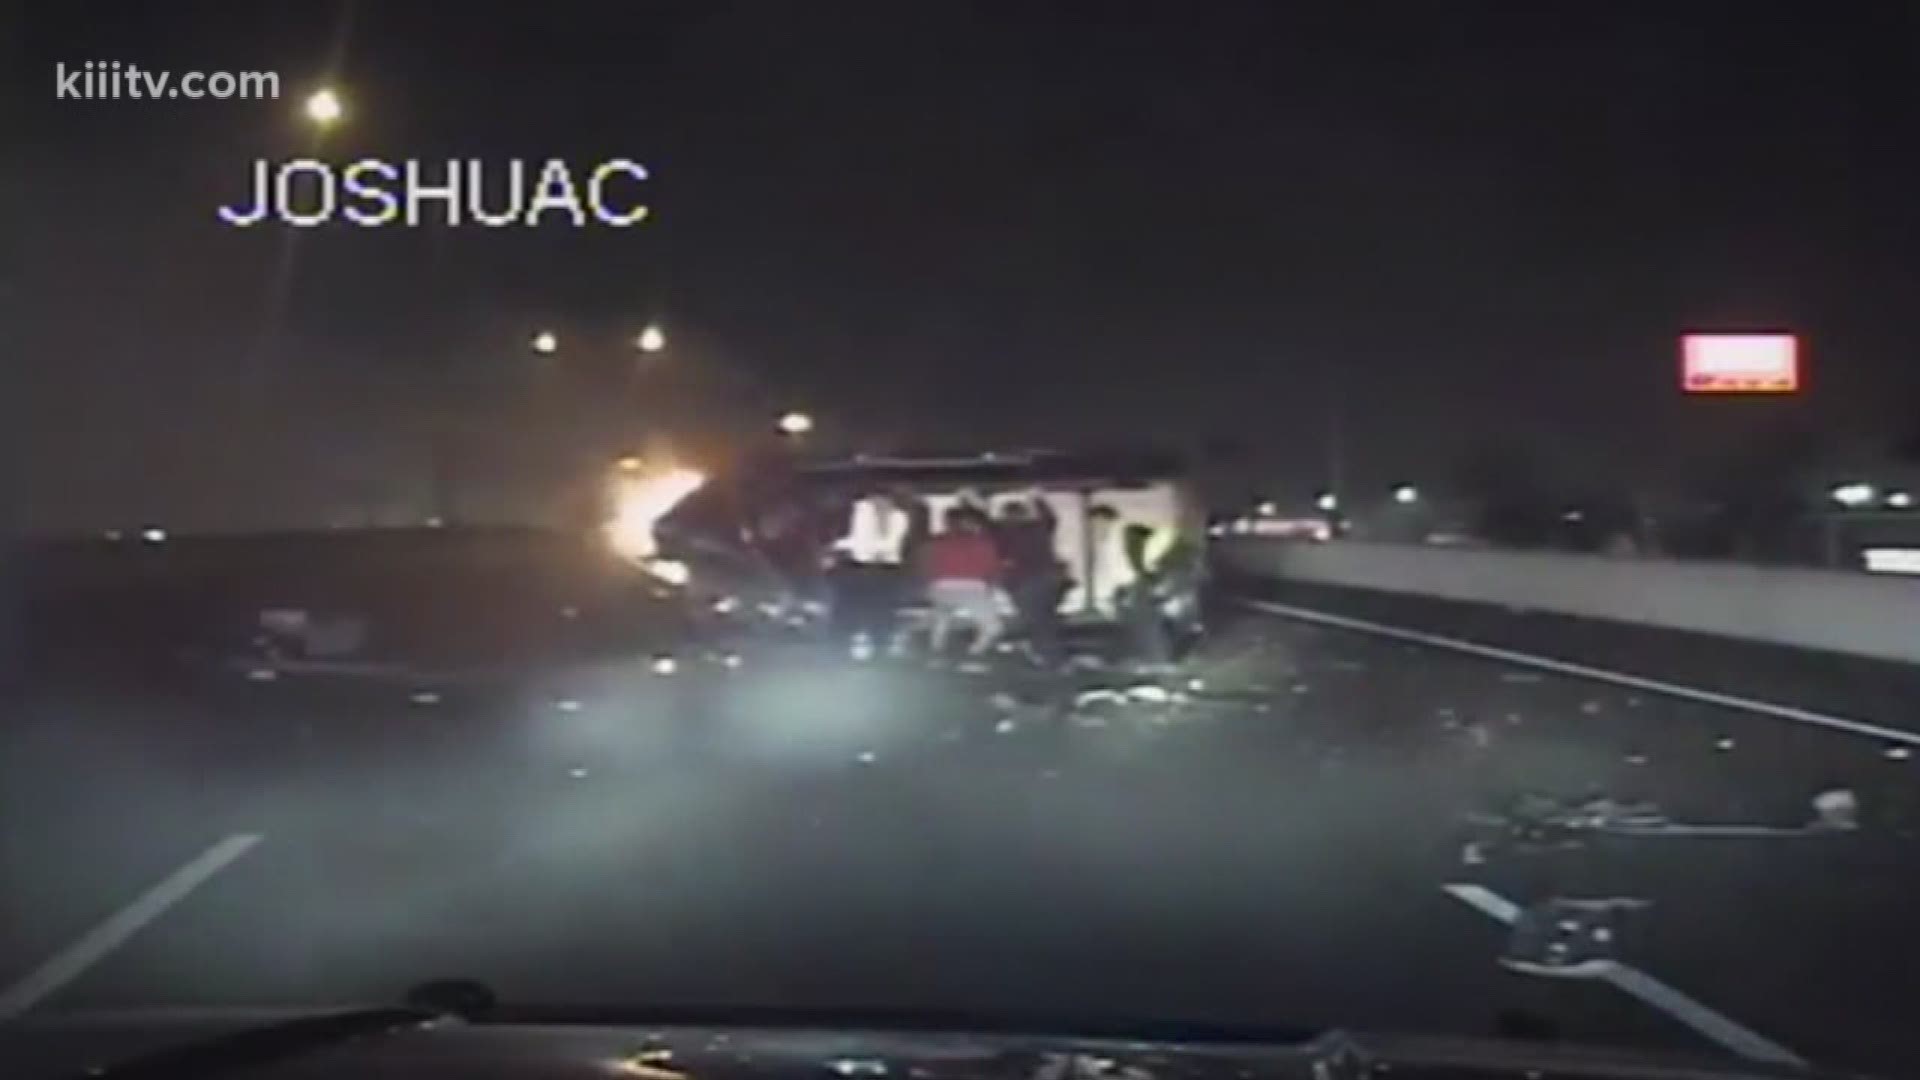 The Corpus Christi Police Department released Friday dash cam video showing the moments after a deadly wrong-way collision killed one man and left four in critical condition.